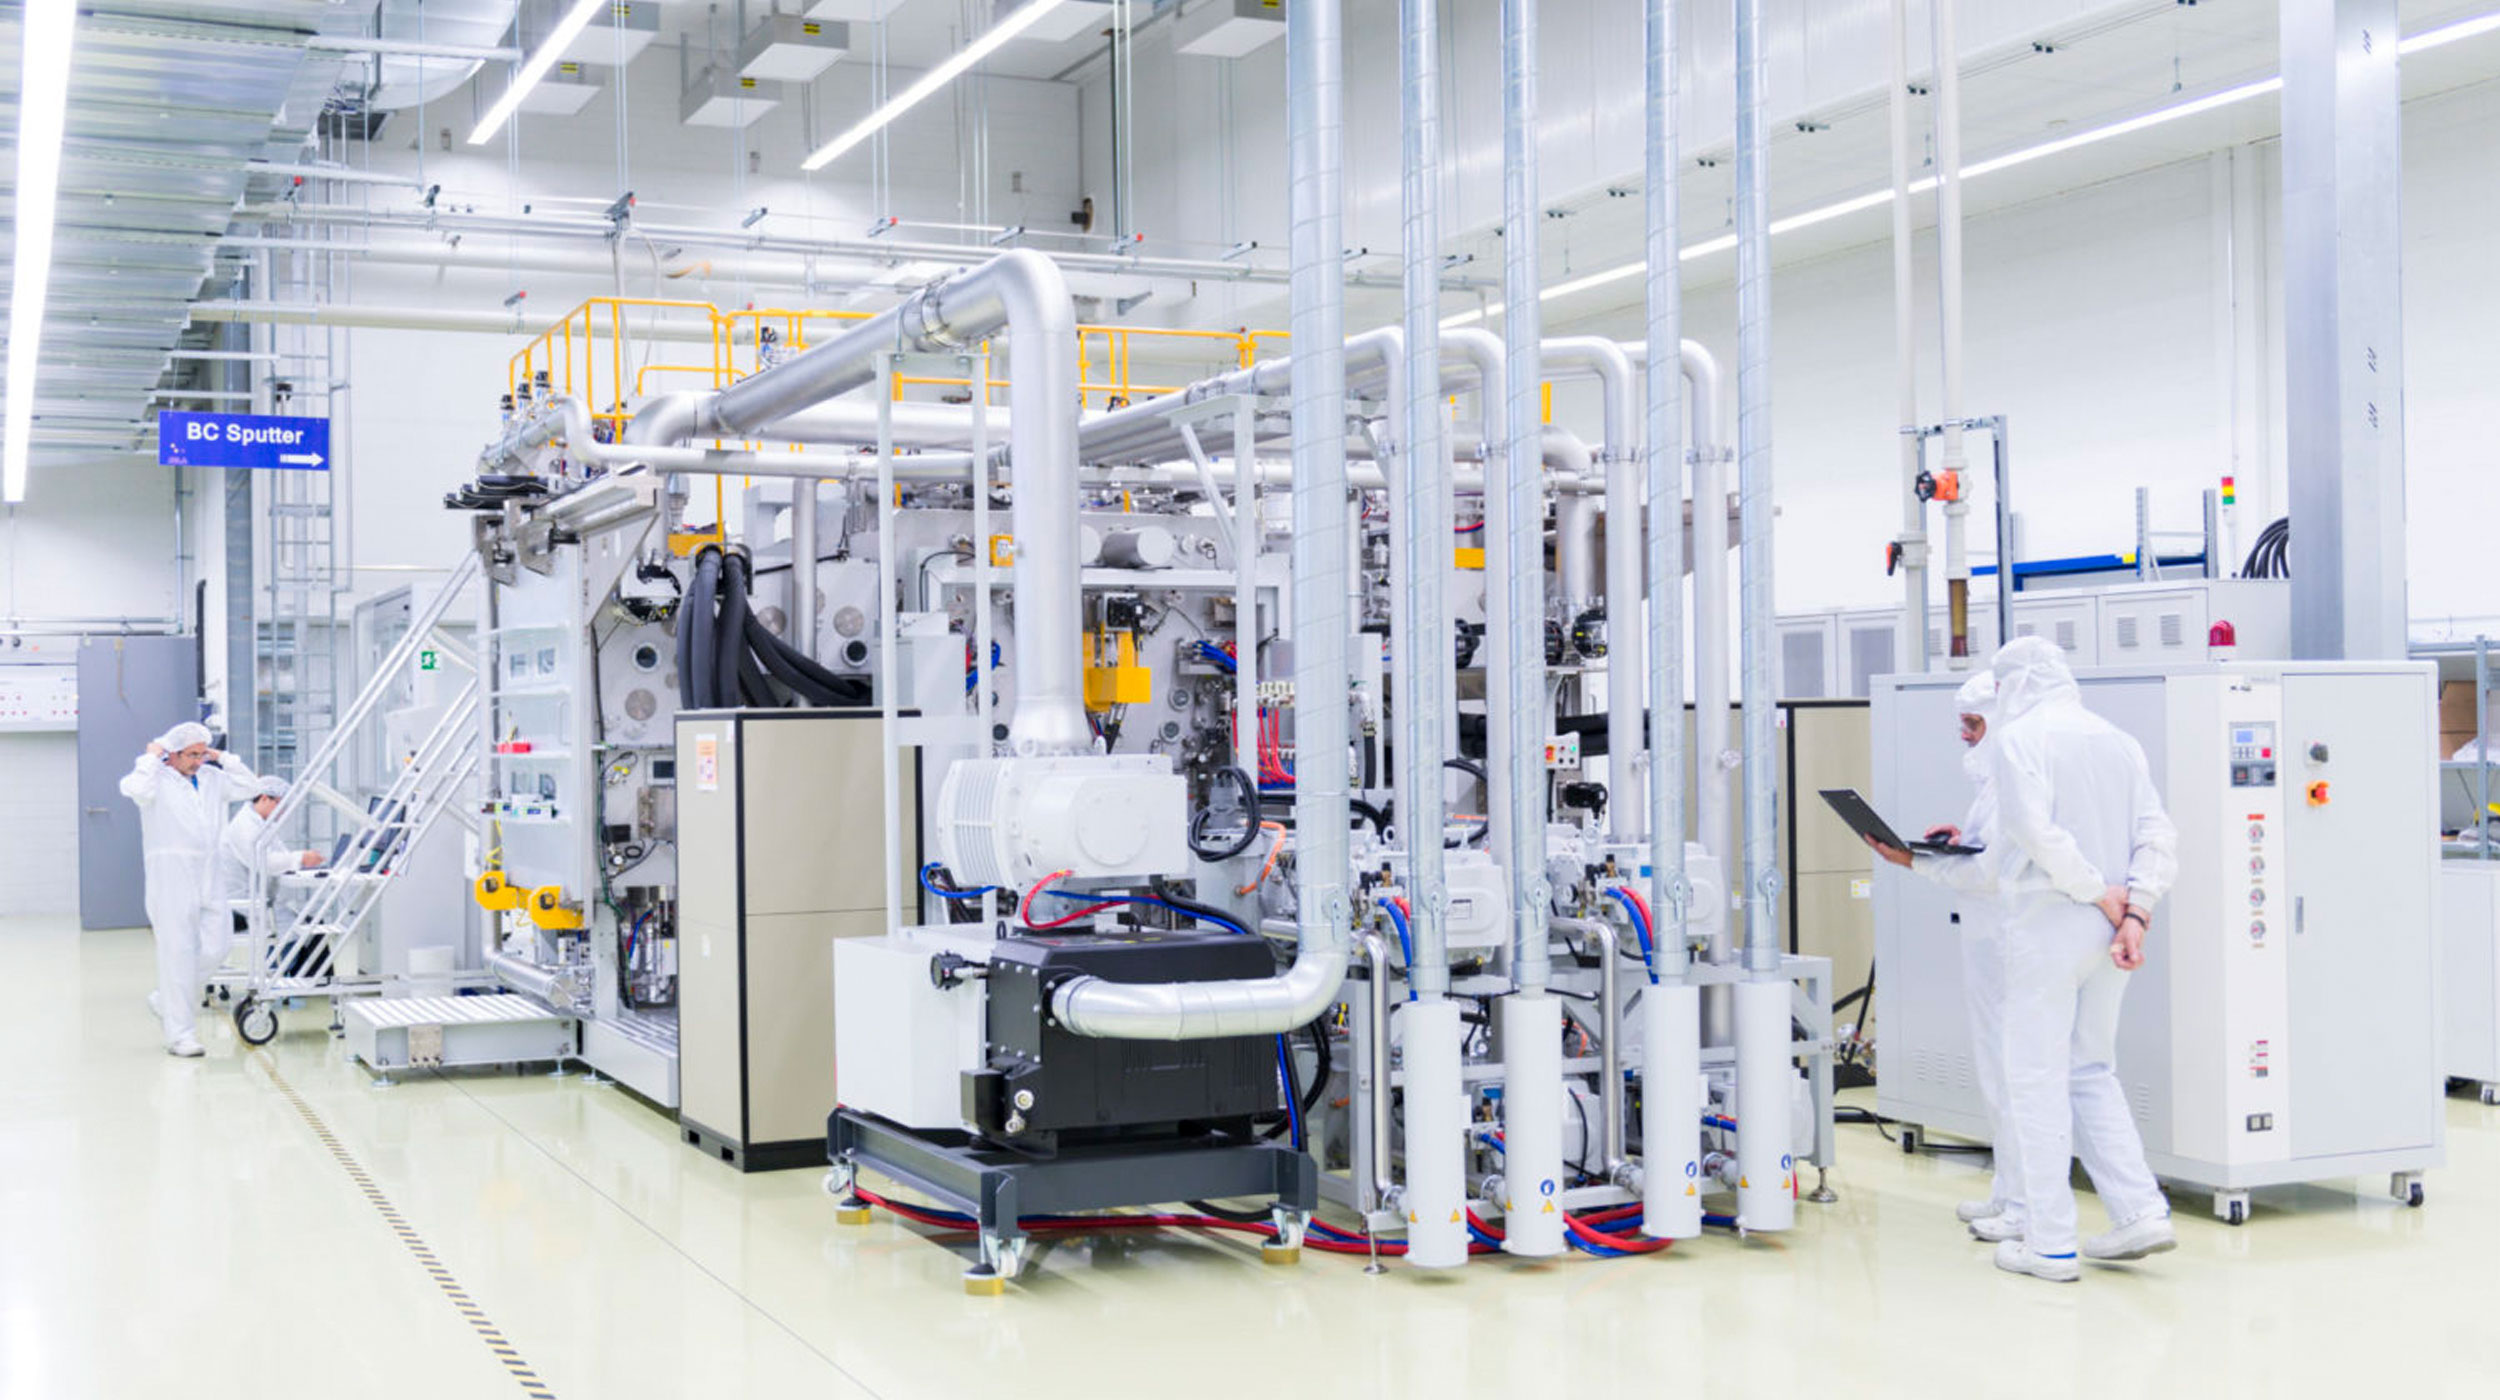 Integrated Smart Manufacturing: end-to-end shop floor solution